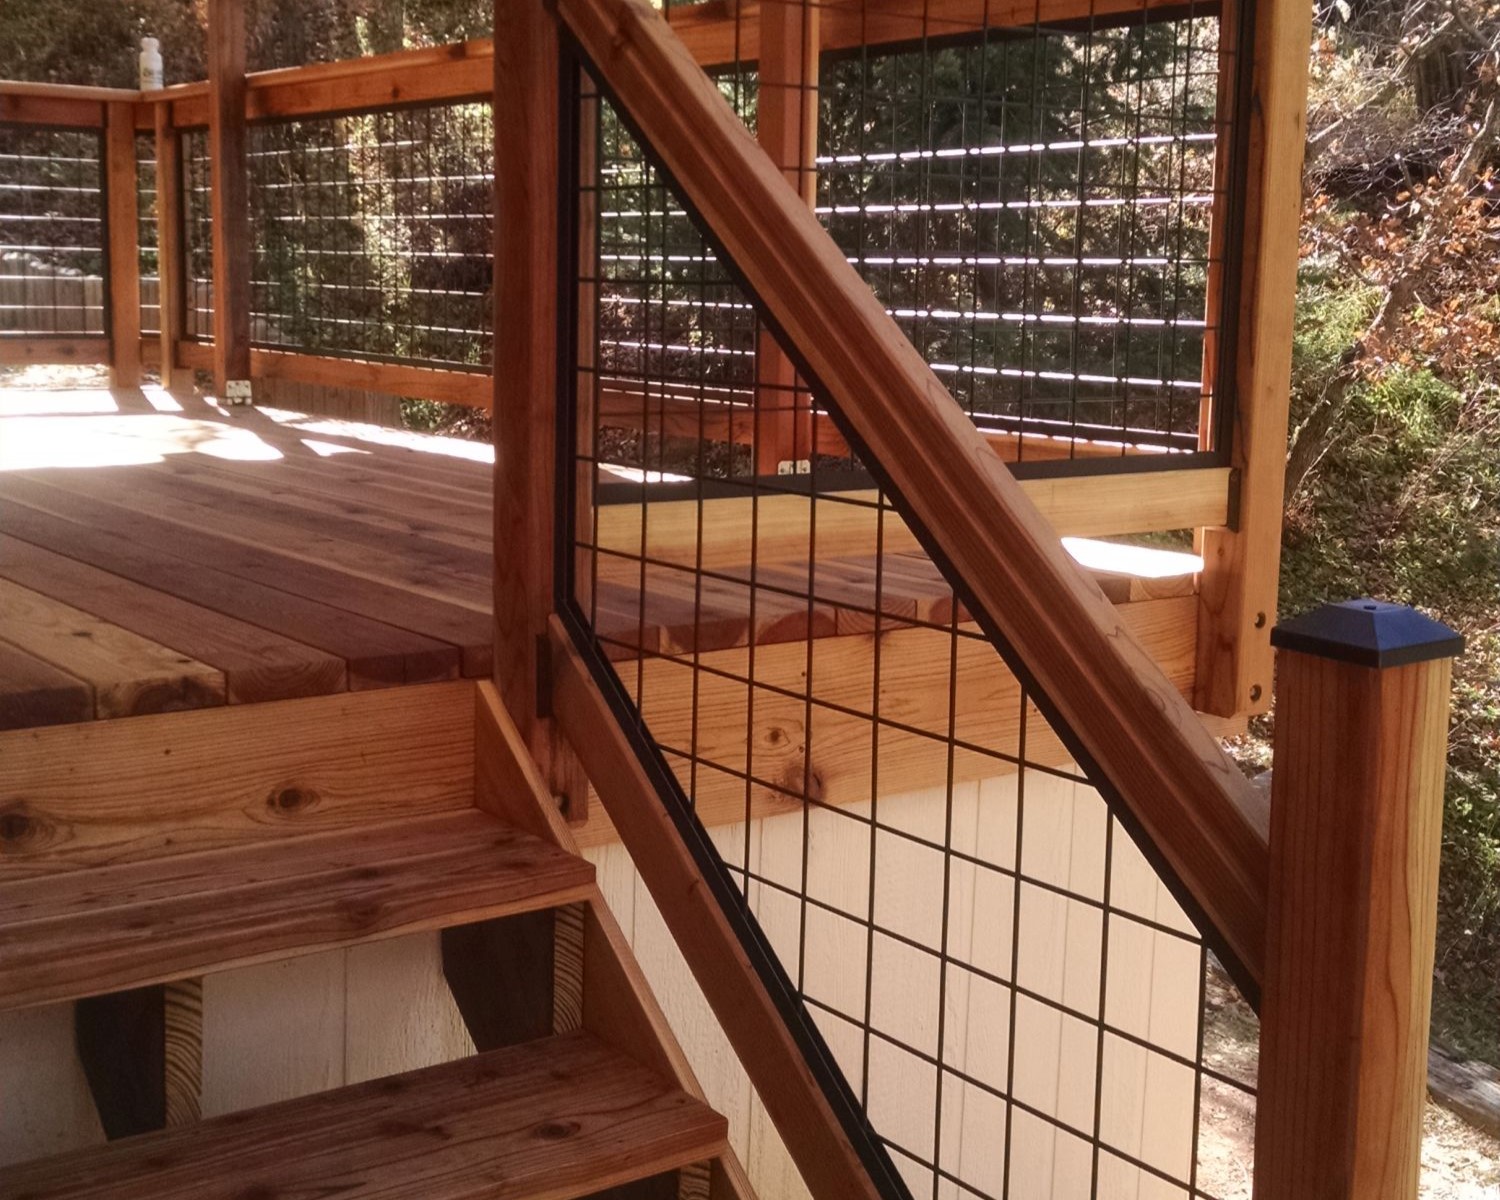 Redwood deck with a Wild Hog railing. The grid design panels are installed between the posts.